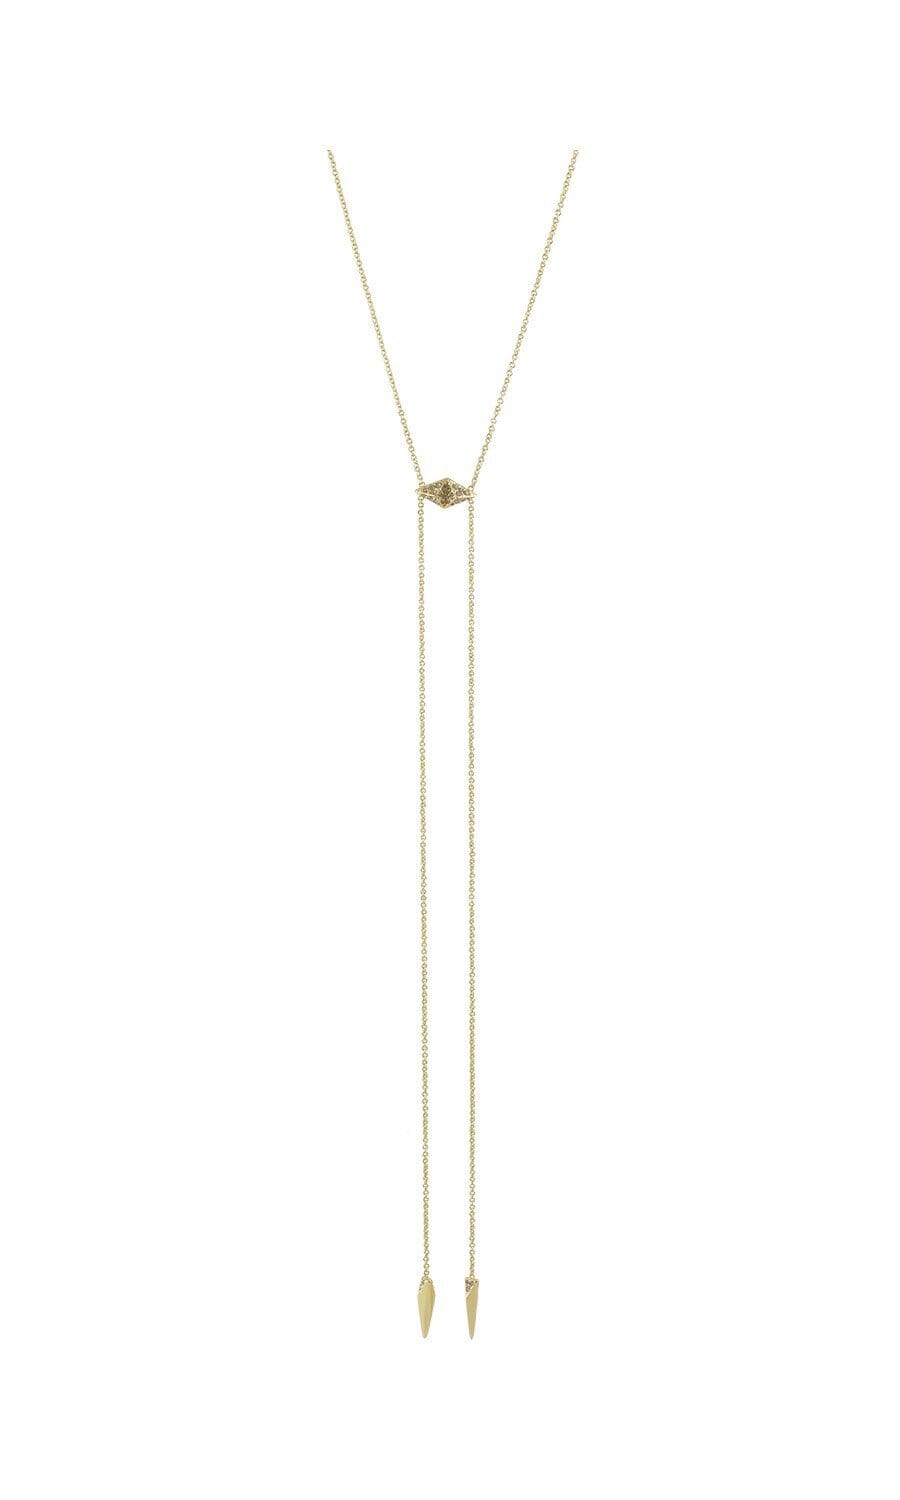 House of Harlow 1960 Gold Samo Bolo Tie Necklace in Gold